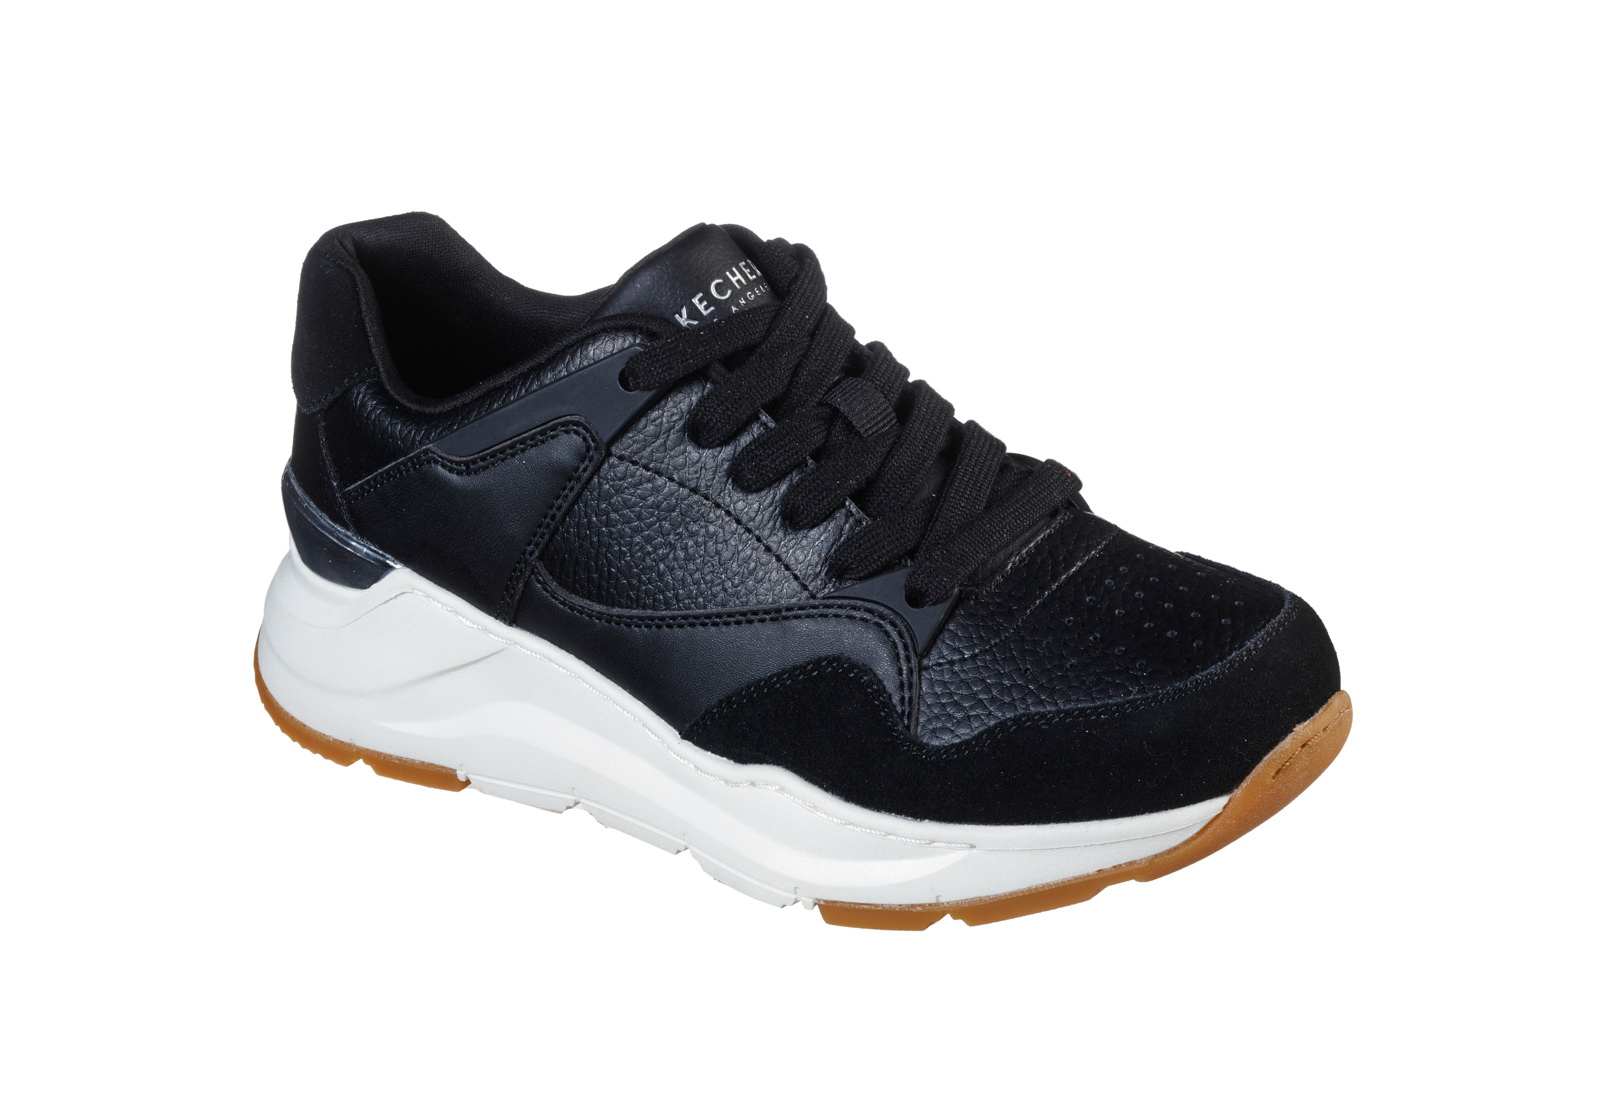 Skechers Sneaker Rovina - Cool To The Core